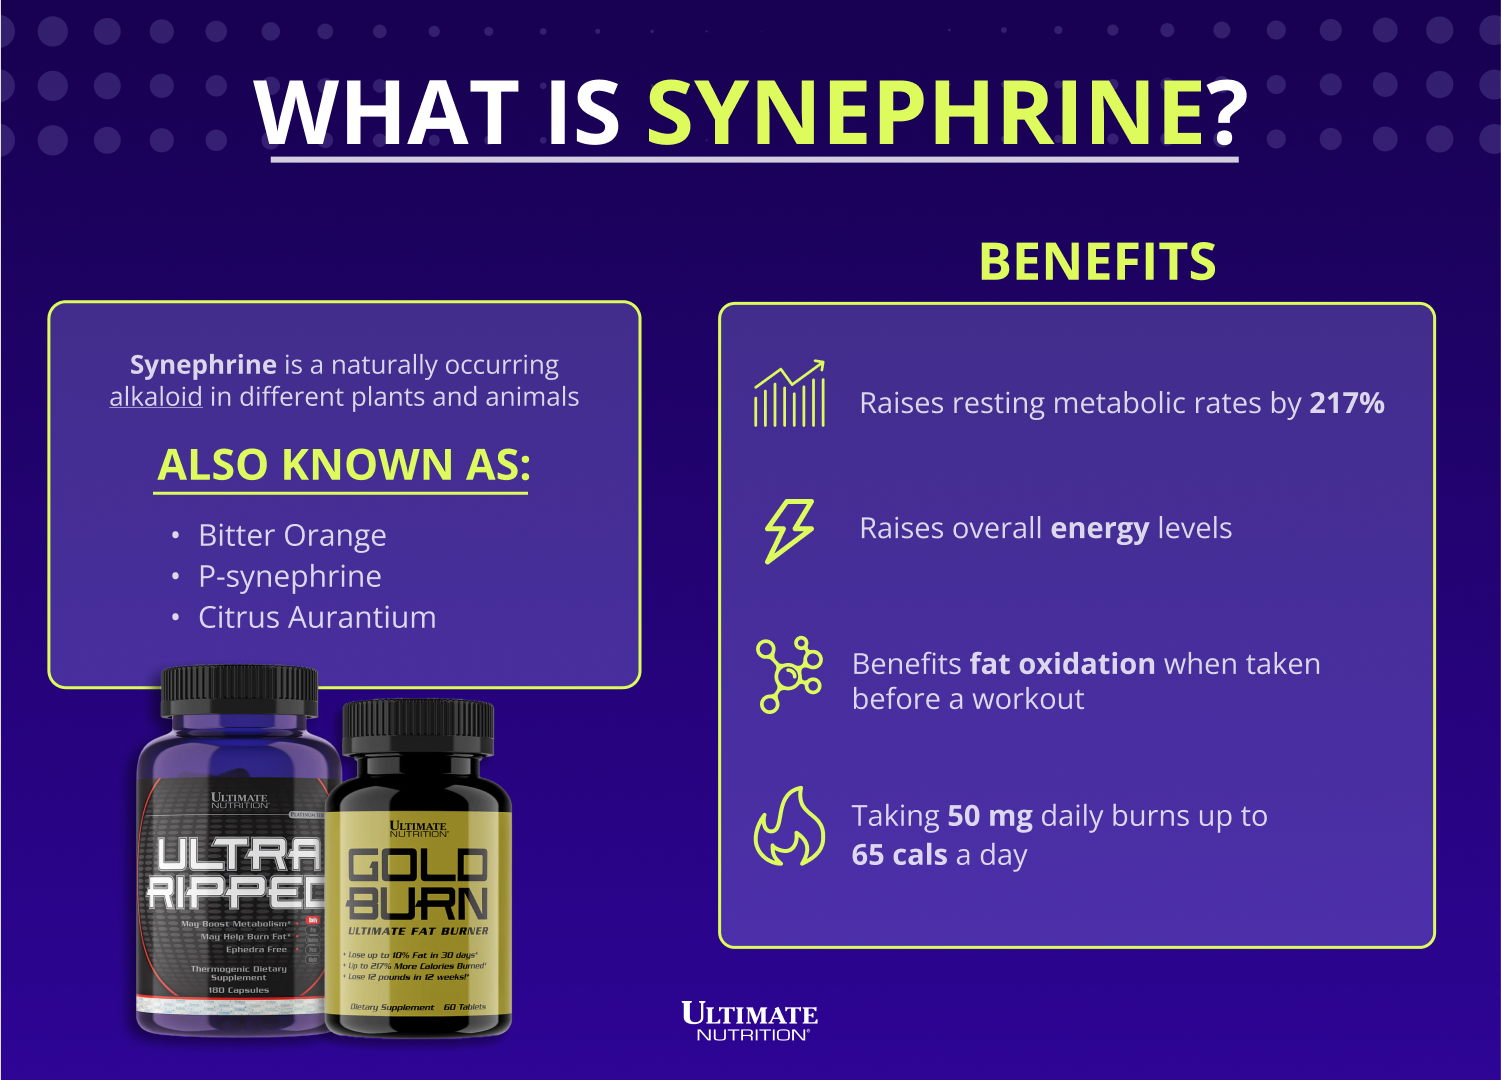 What is Synephrine?